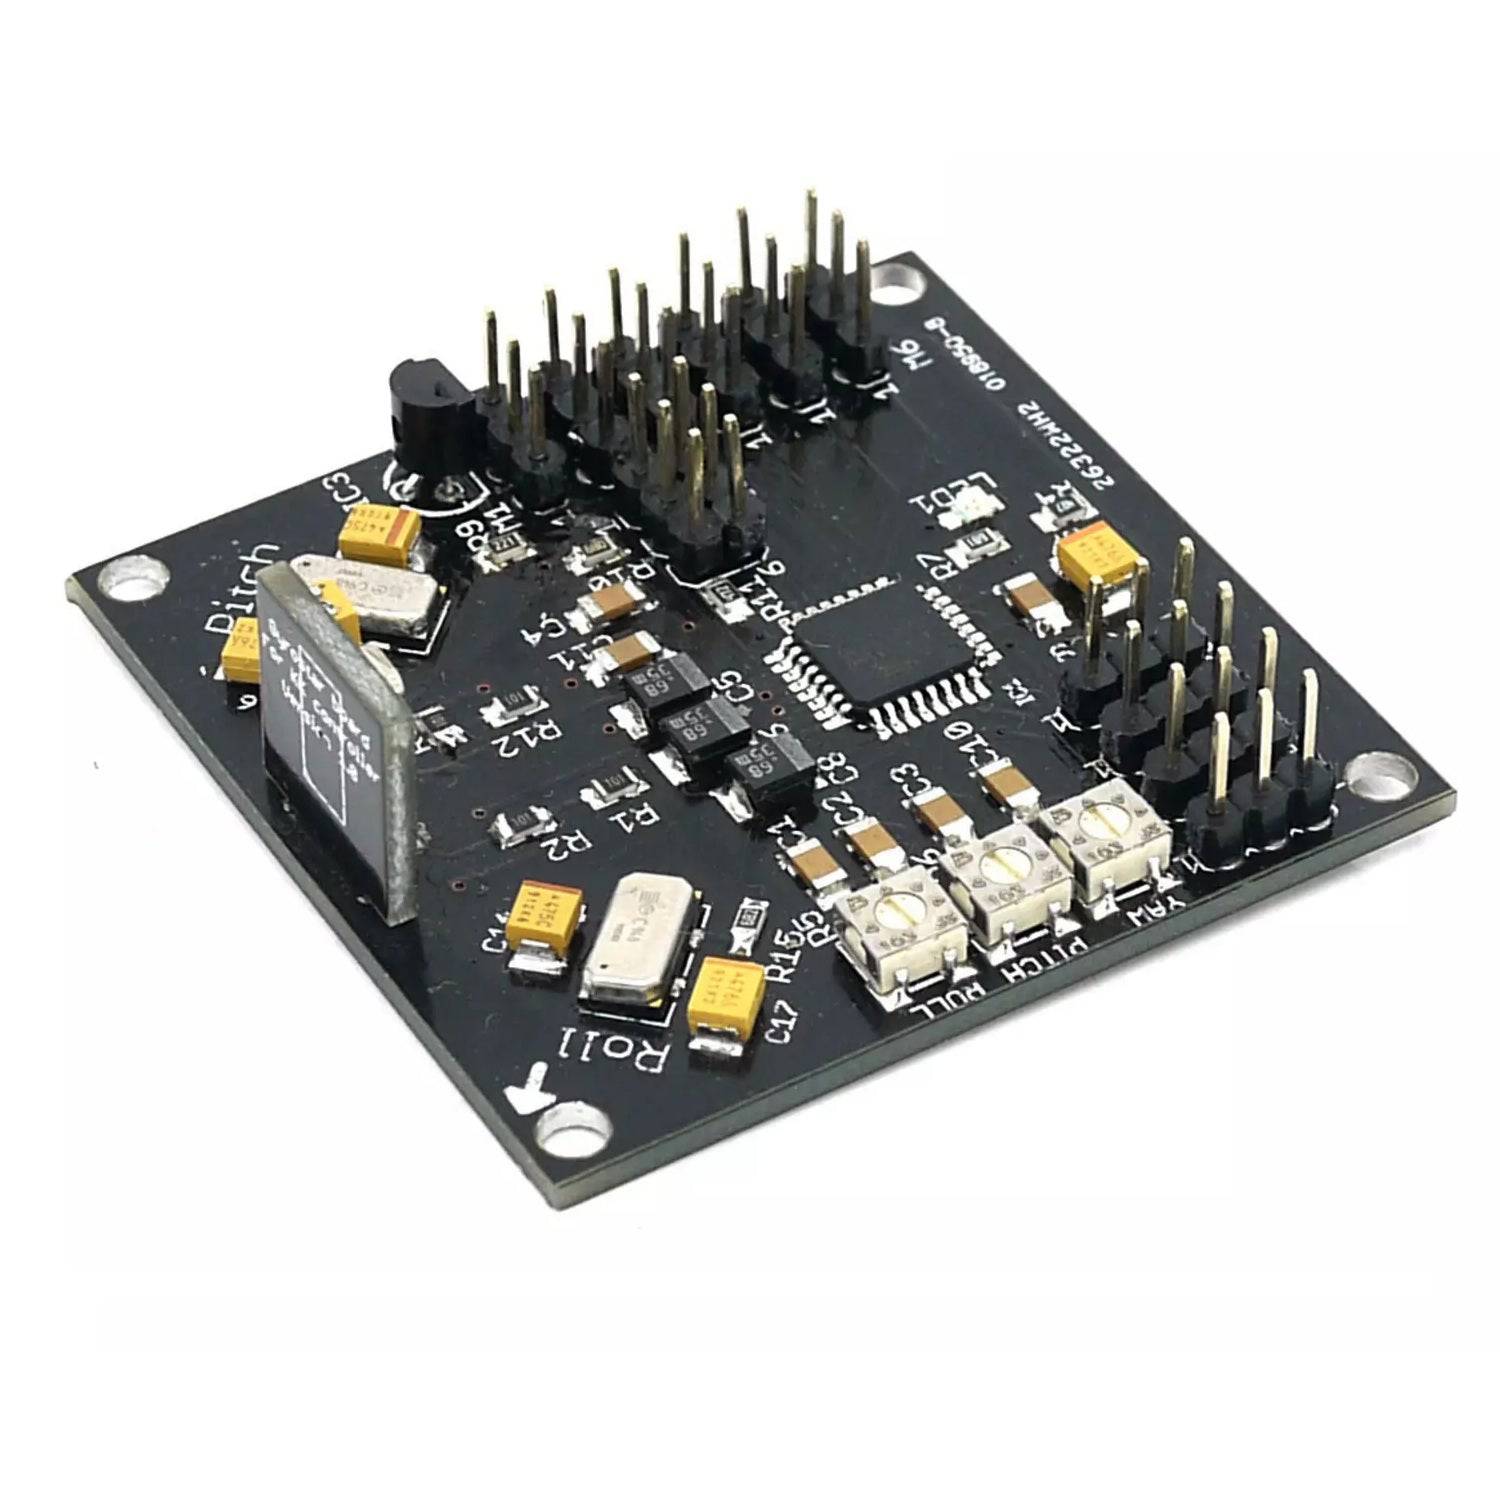 KK Multicopter Flight Control Board V5.5 Tripcopter Quadcopter Hexacopter - RS037 - REES52